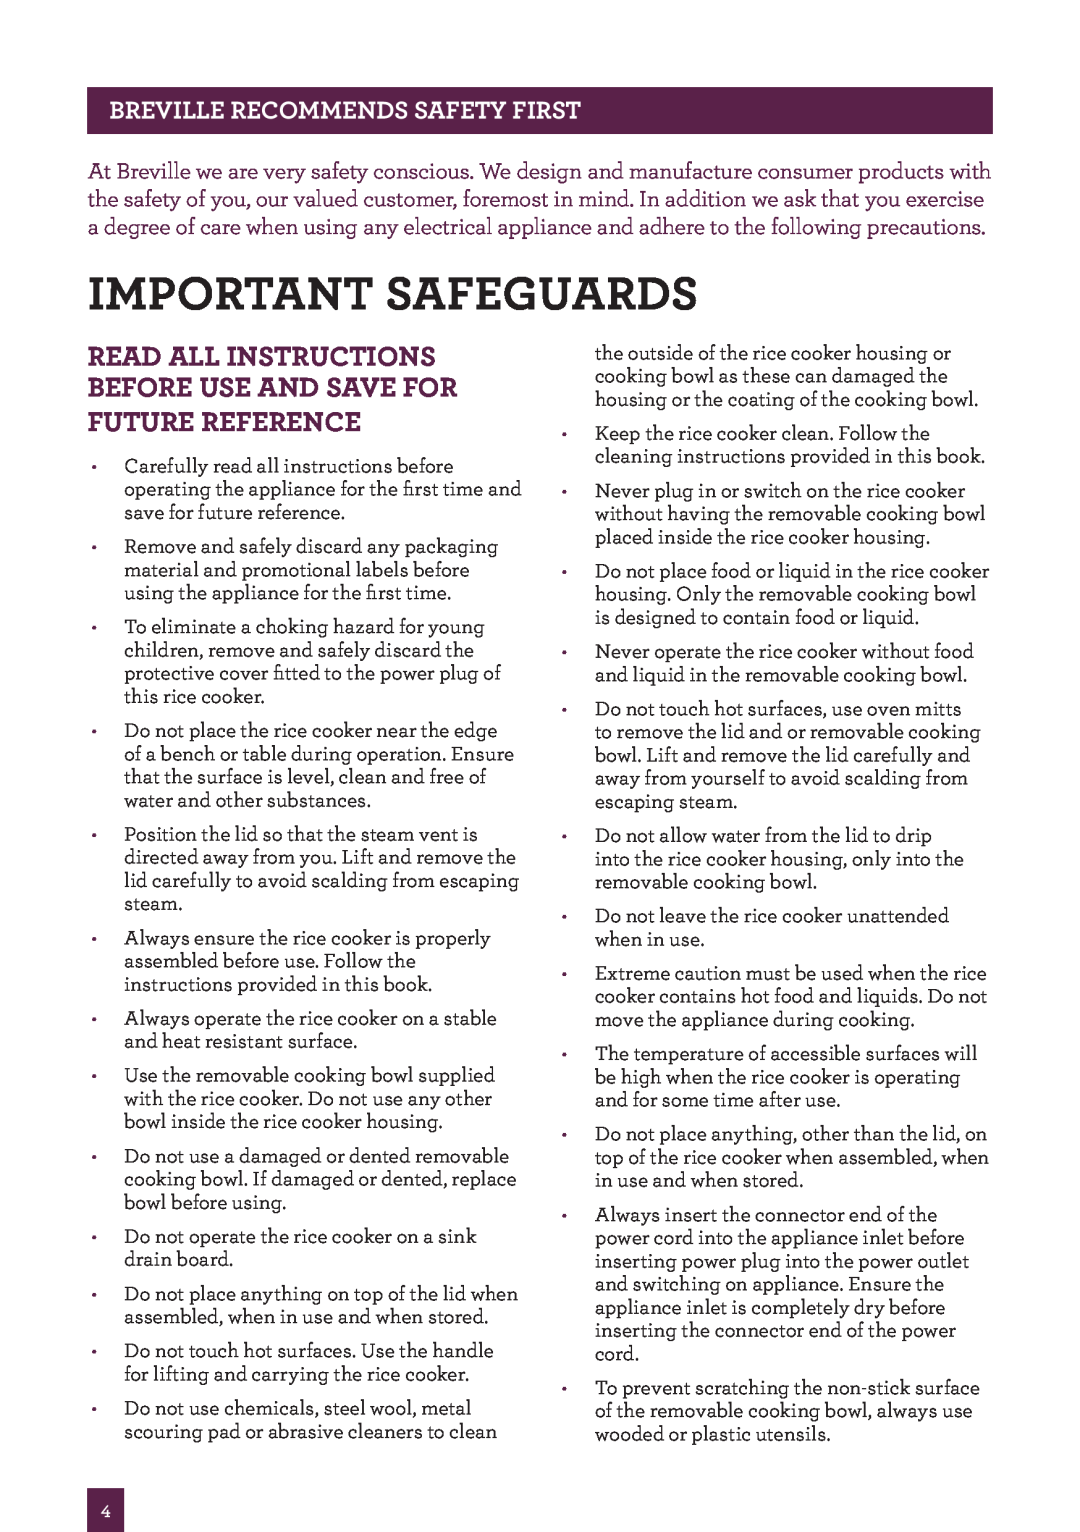 Breville BRC460 brochure Important safeguards, Breville recommends safety first 